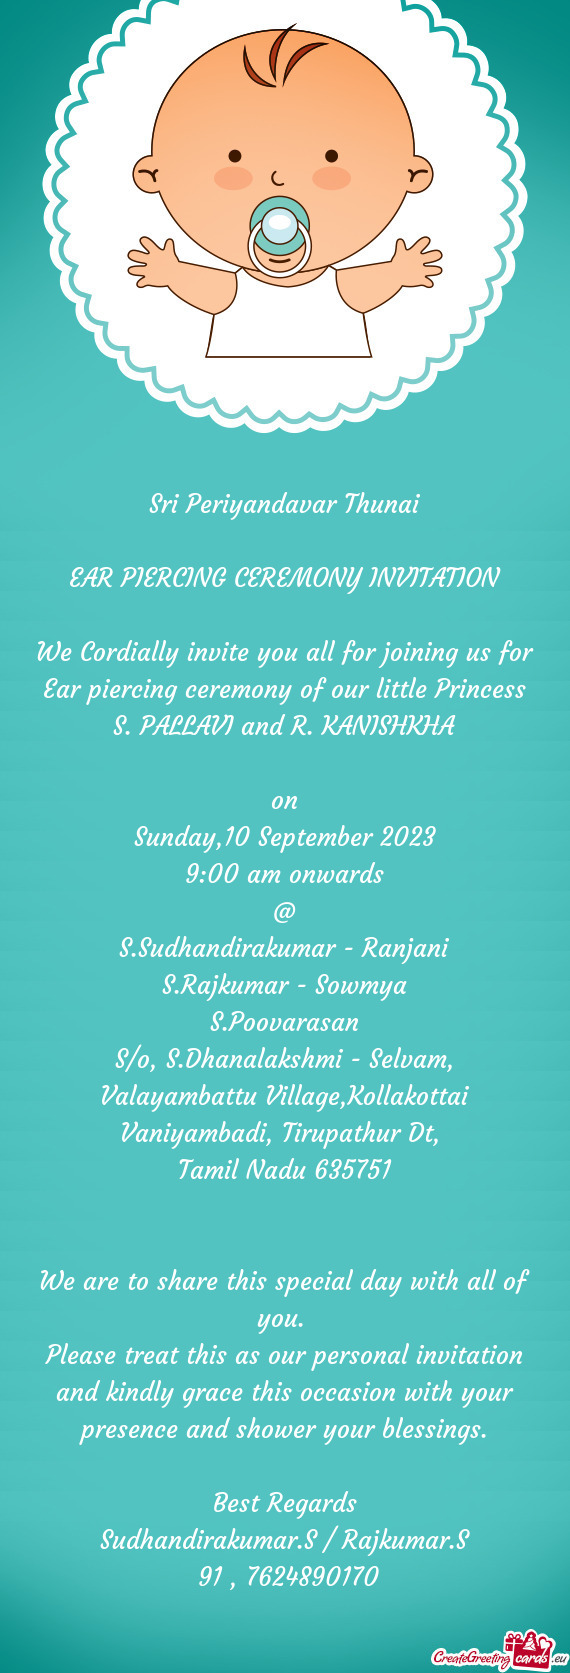 We Cordially invite you all for joining us for Ear piercing ceremony of our little Princess S. PALLA